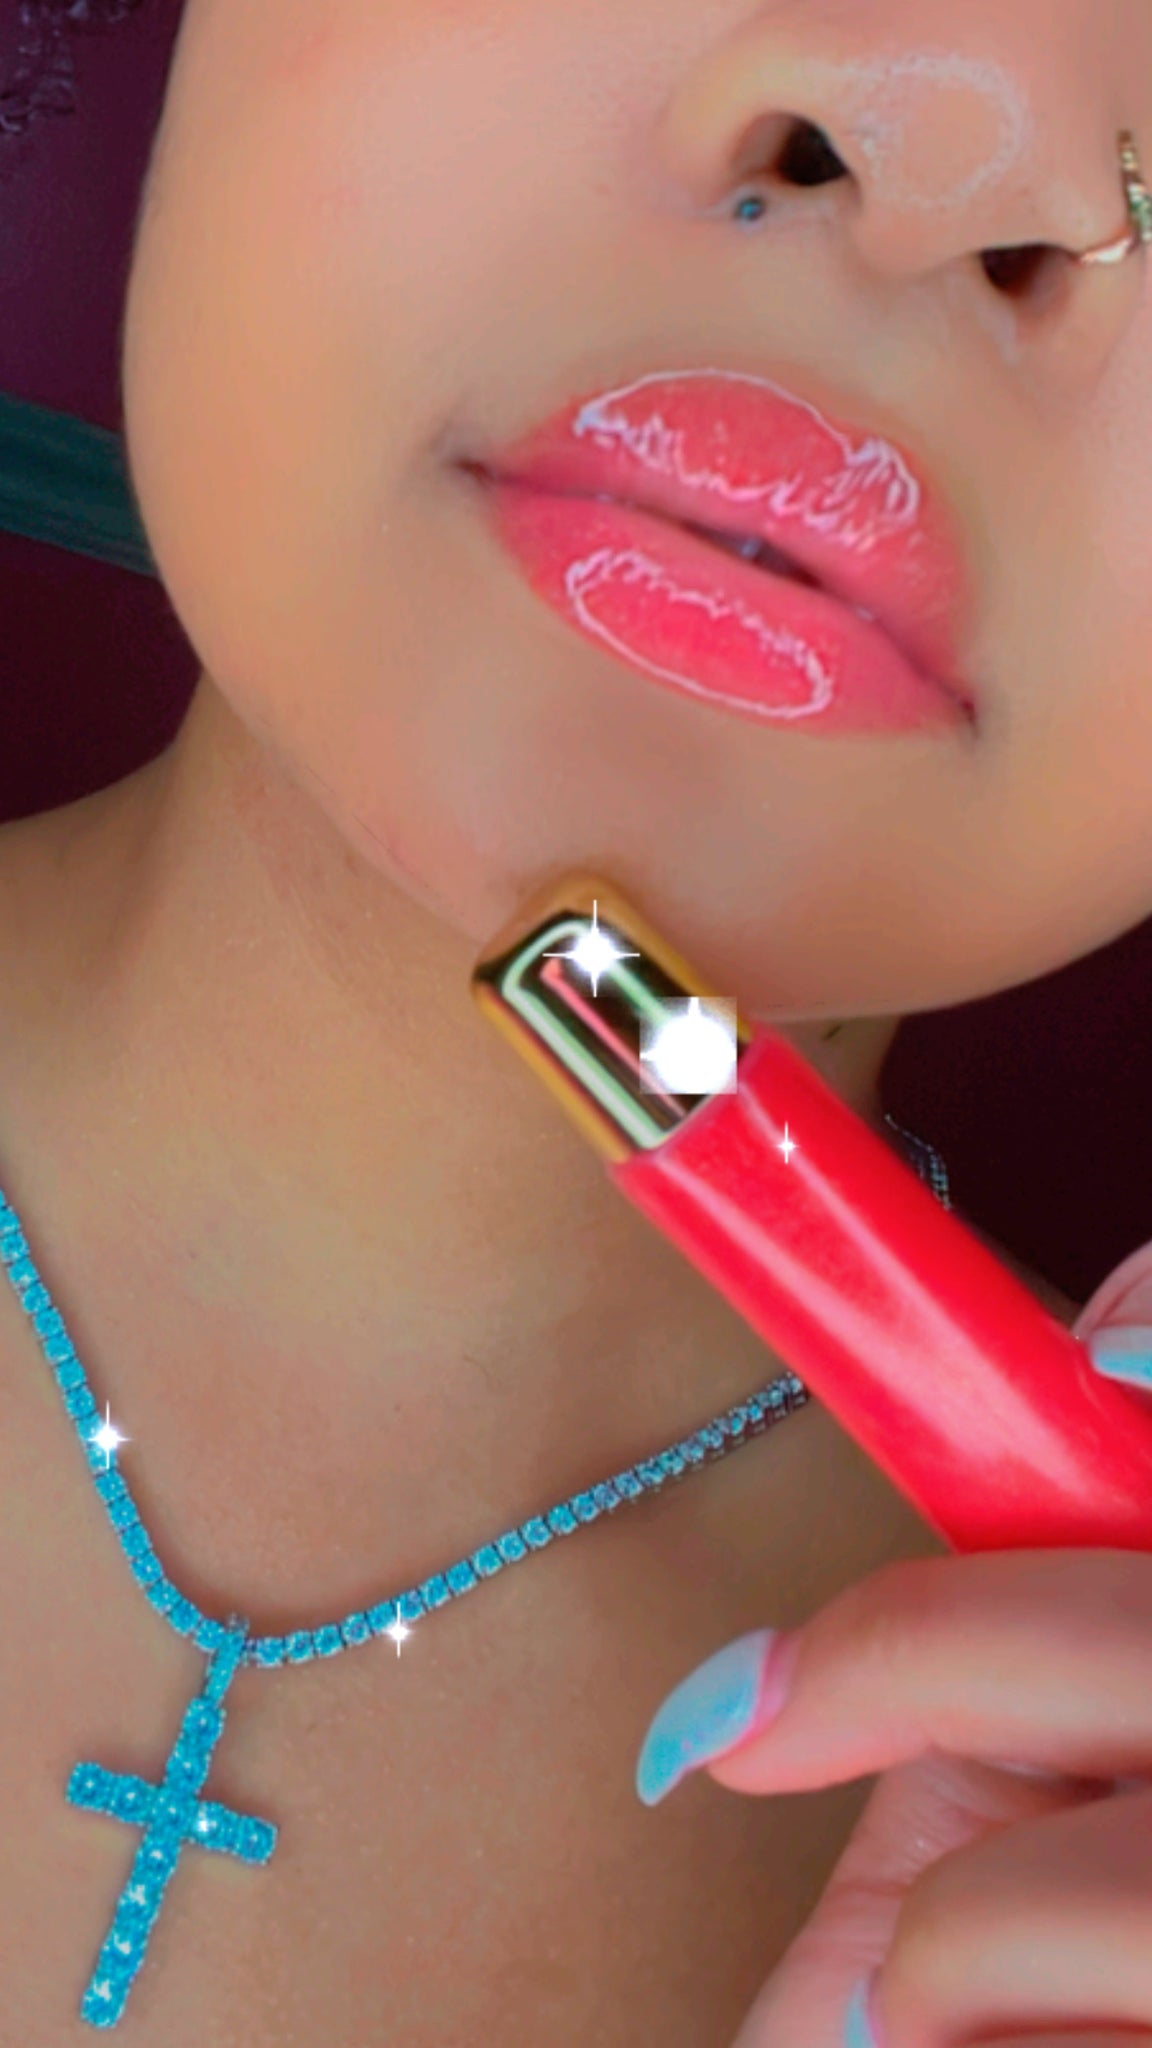 “Cherry On Top” Lip Frosting